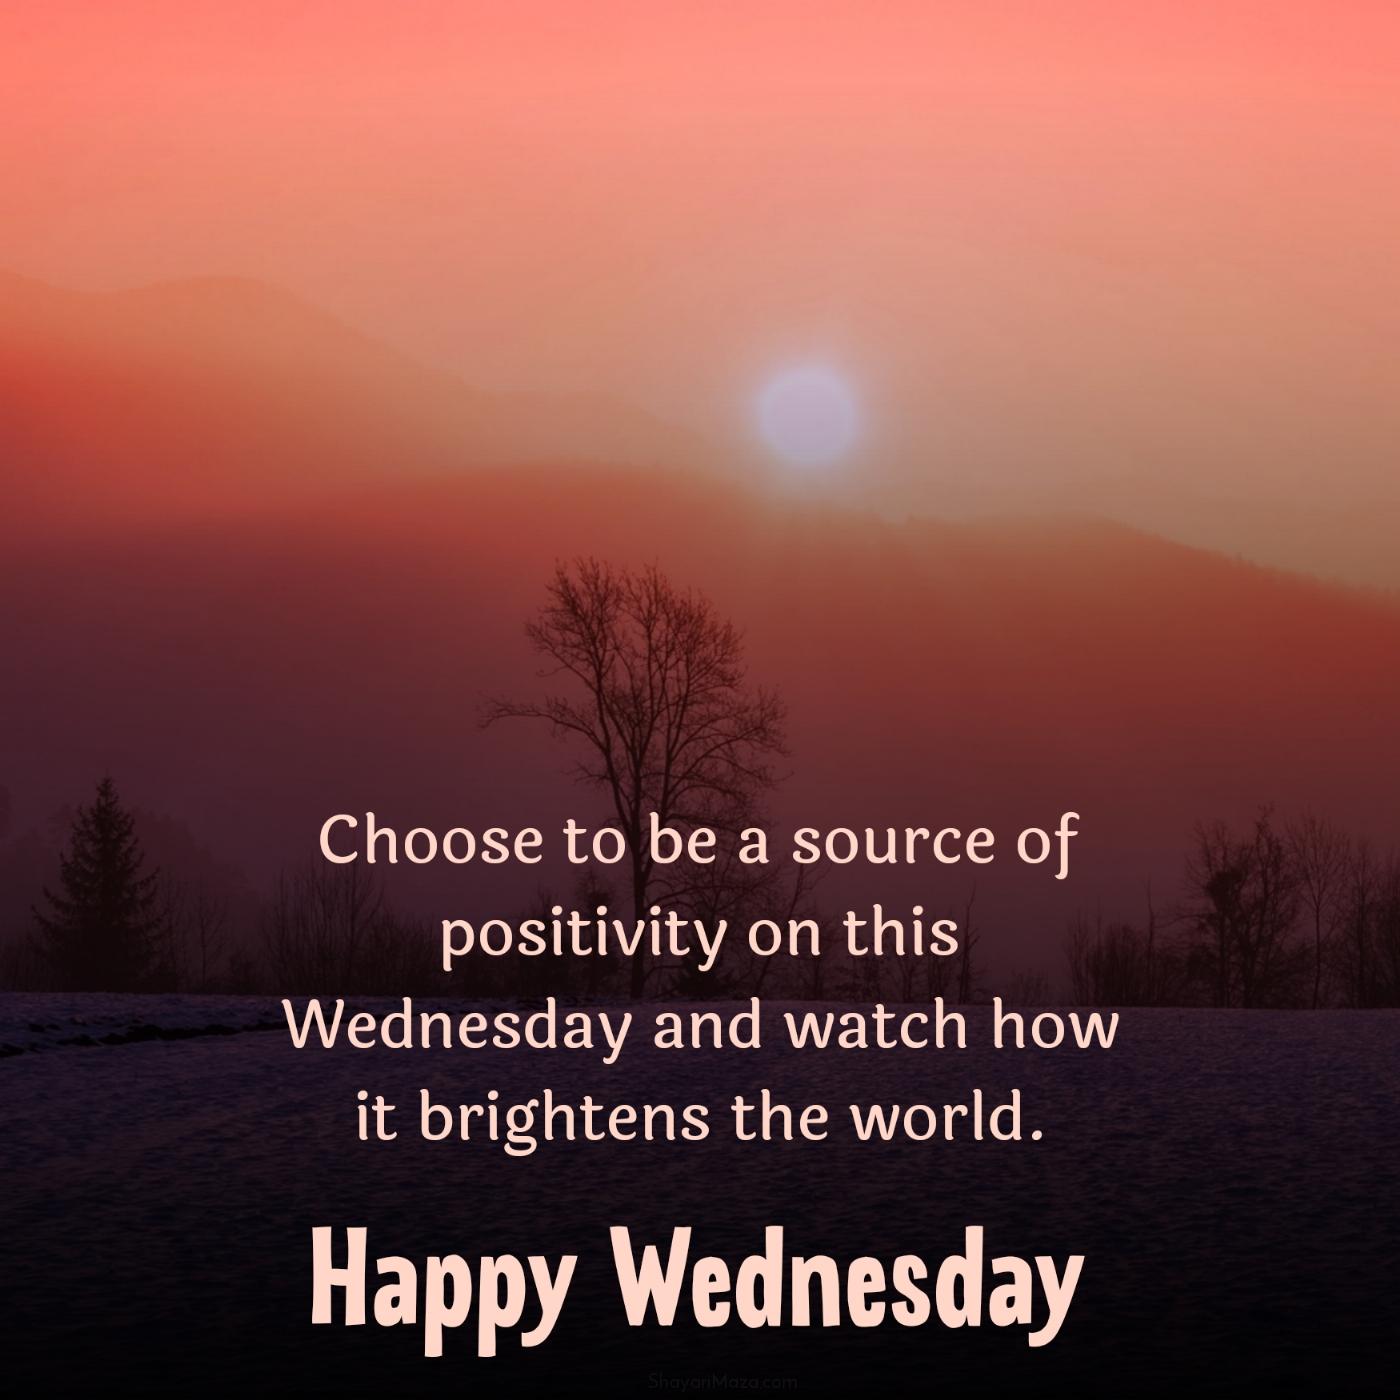 Choose to be a source of positivity on this Wednesday